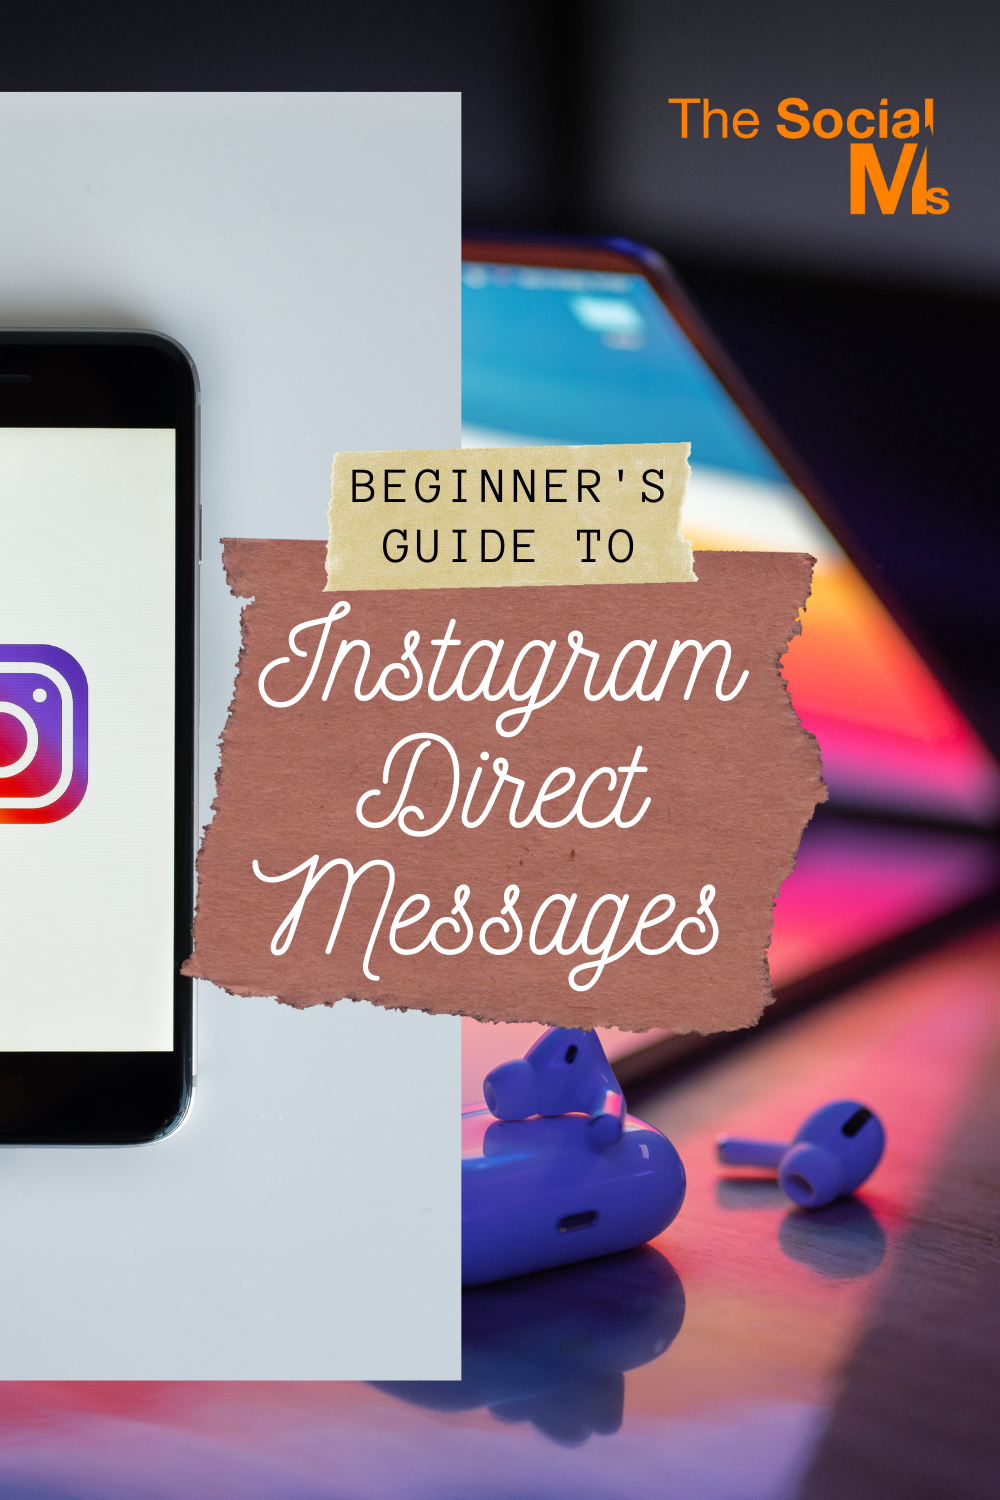 Instagram DM (Direct Message) is arguably one of the most underrated marketing channels that you are probably not using correctly right now. Here is your guide to Instagram direct messages for business and Why You Should Use Instagram Direct Messages for Your Business #instagram #instagramtips #instagrammarketing #instagramfeatures #instagramdirectmessages #directmessages